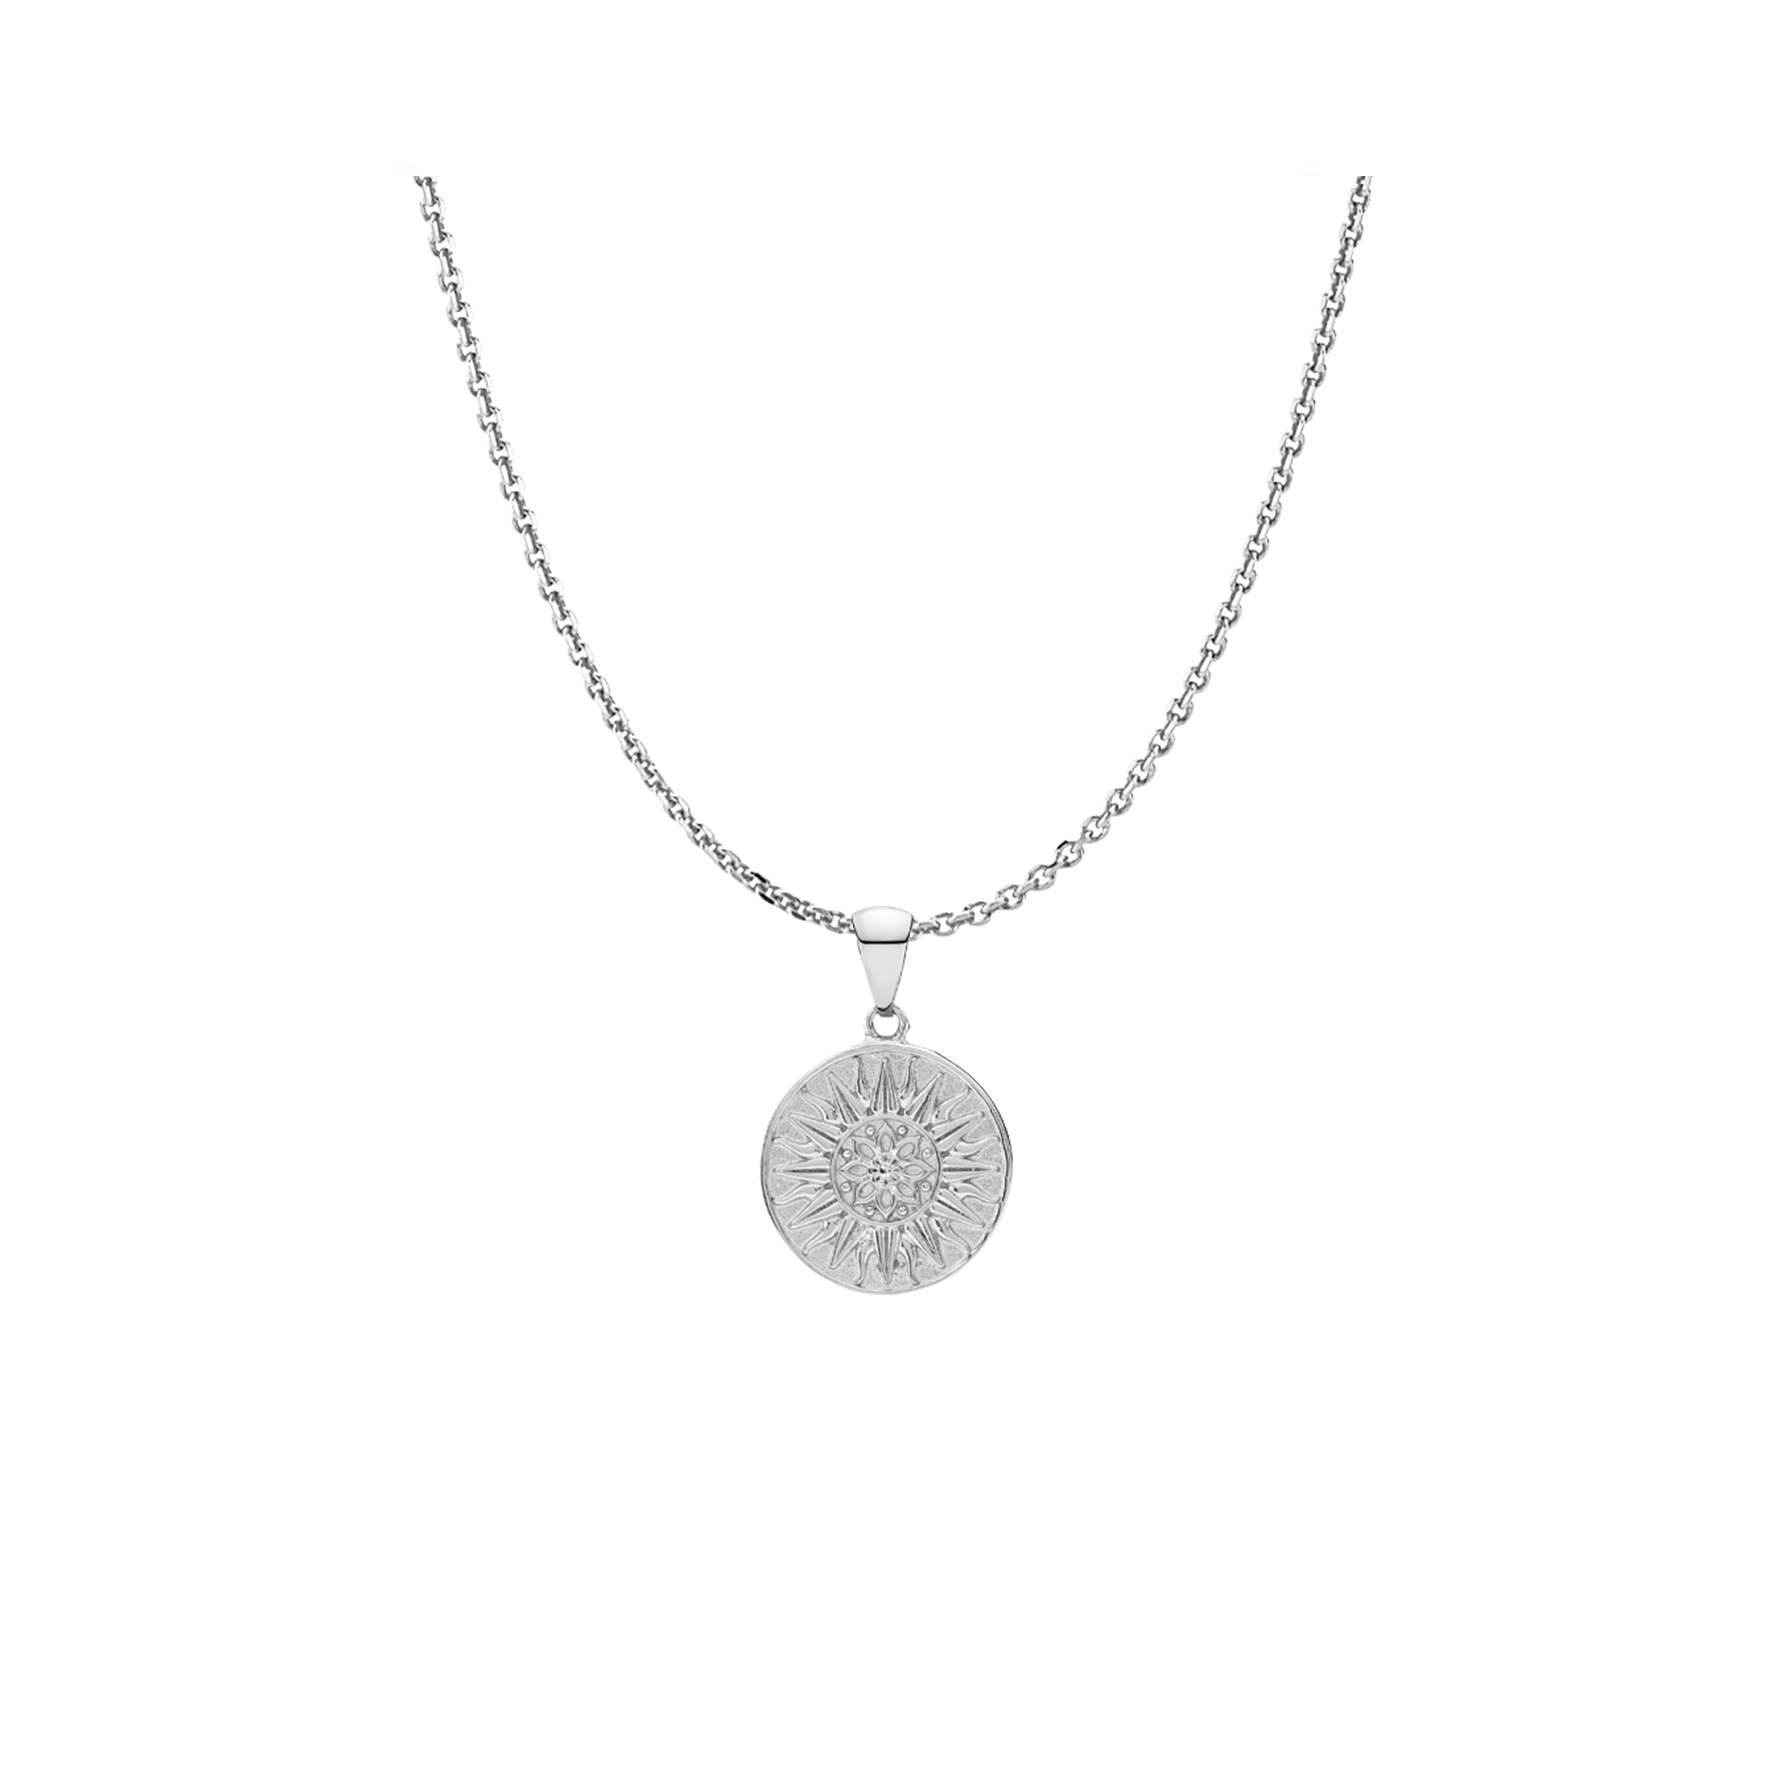 Frida Necklace from Izabel Camille in Silver Sterling 925